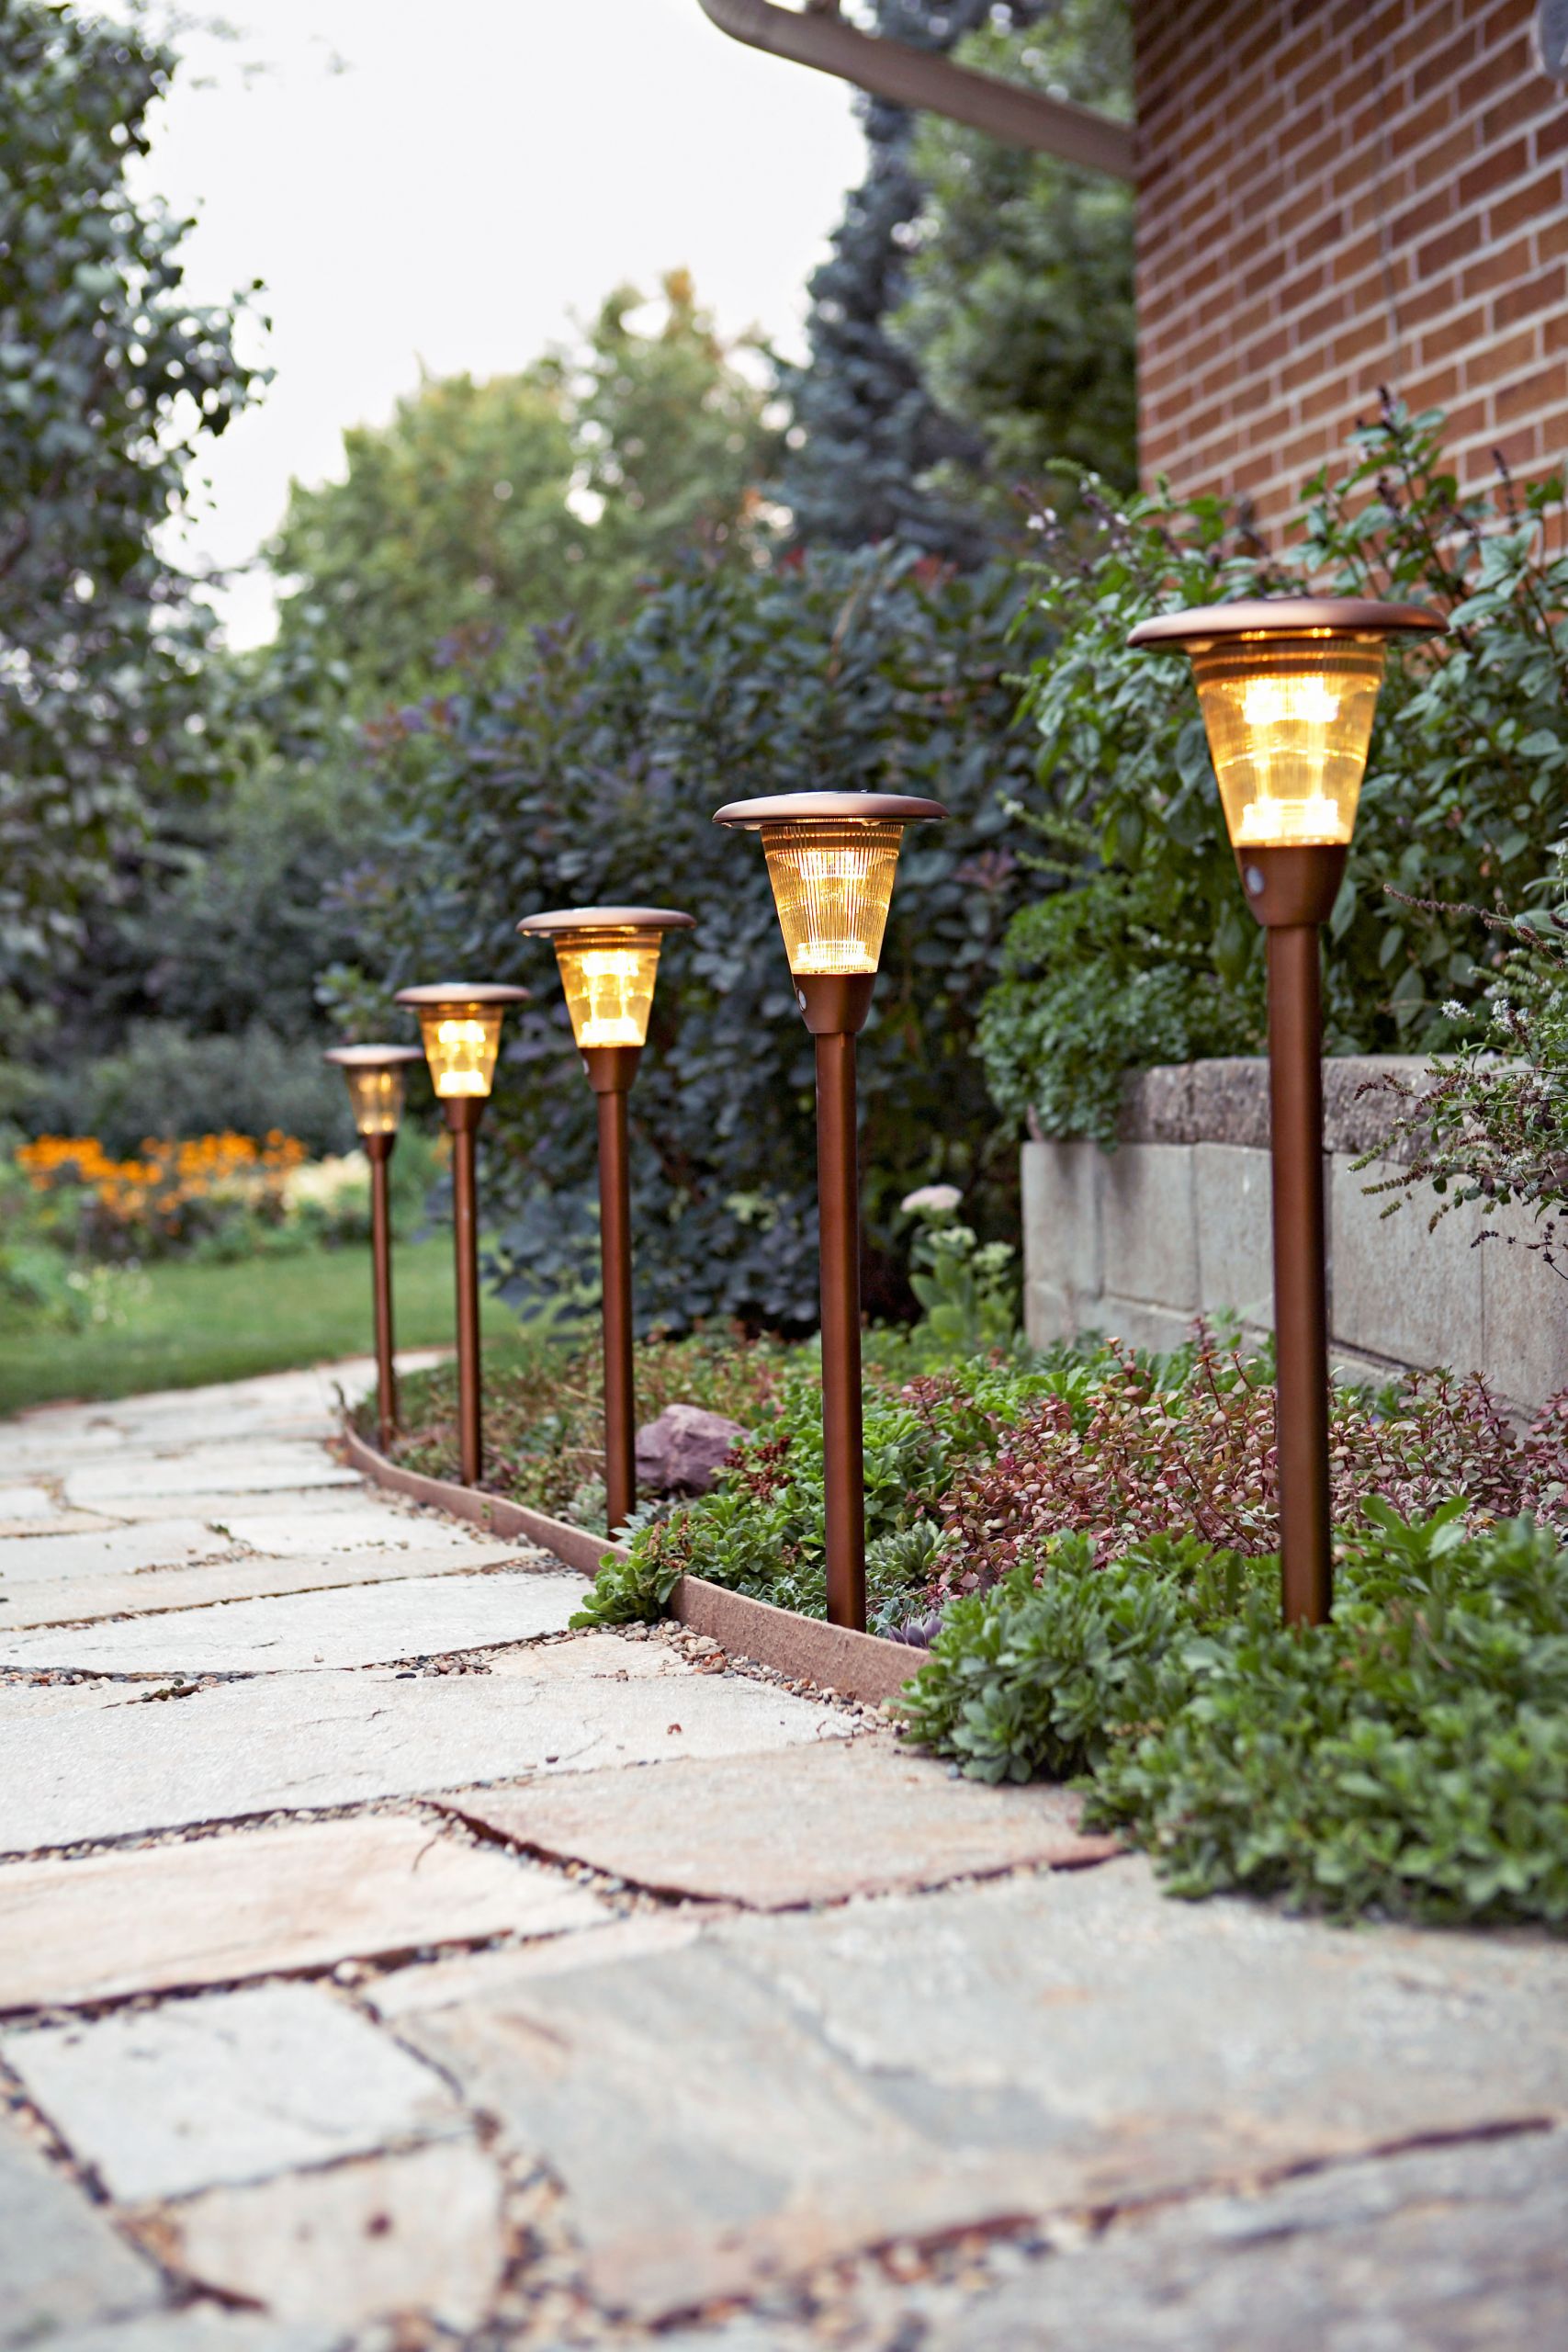 Solar Landscape Lights
 Solar Landscape Lighting for Gardens Paths Pools & Every